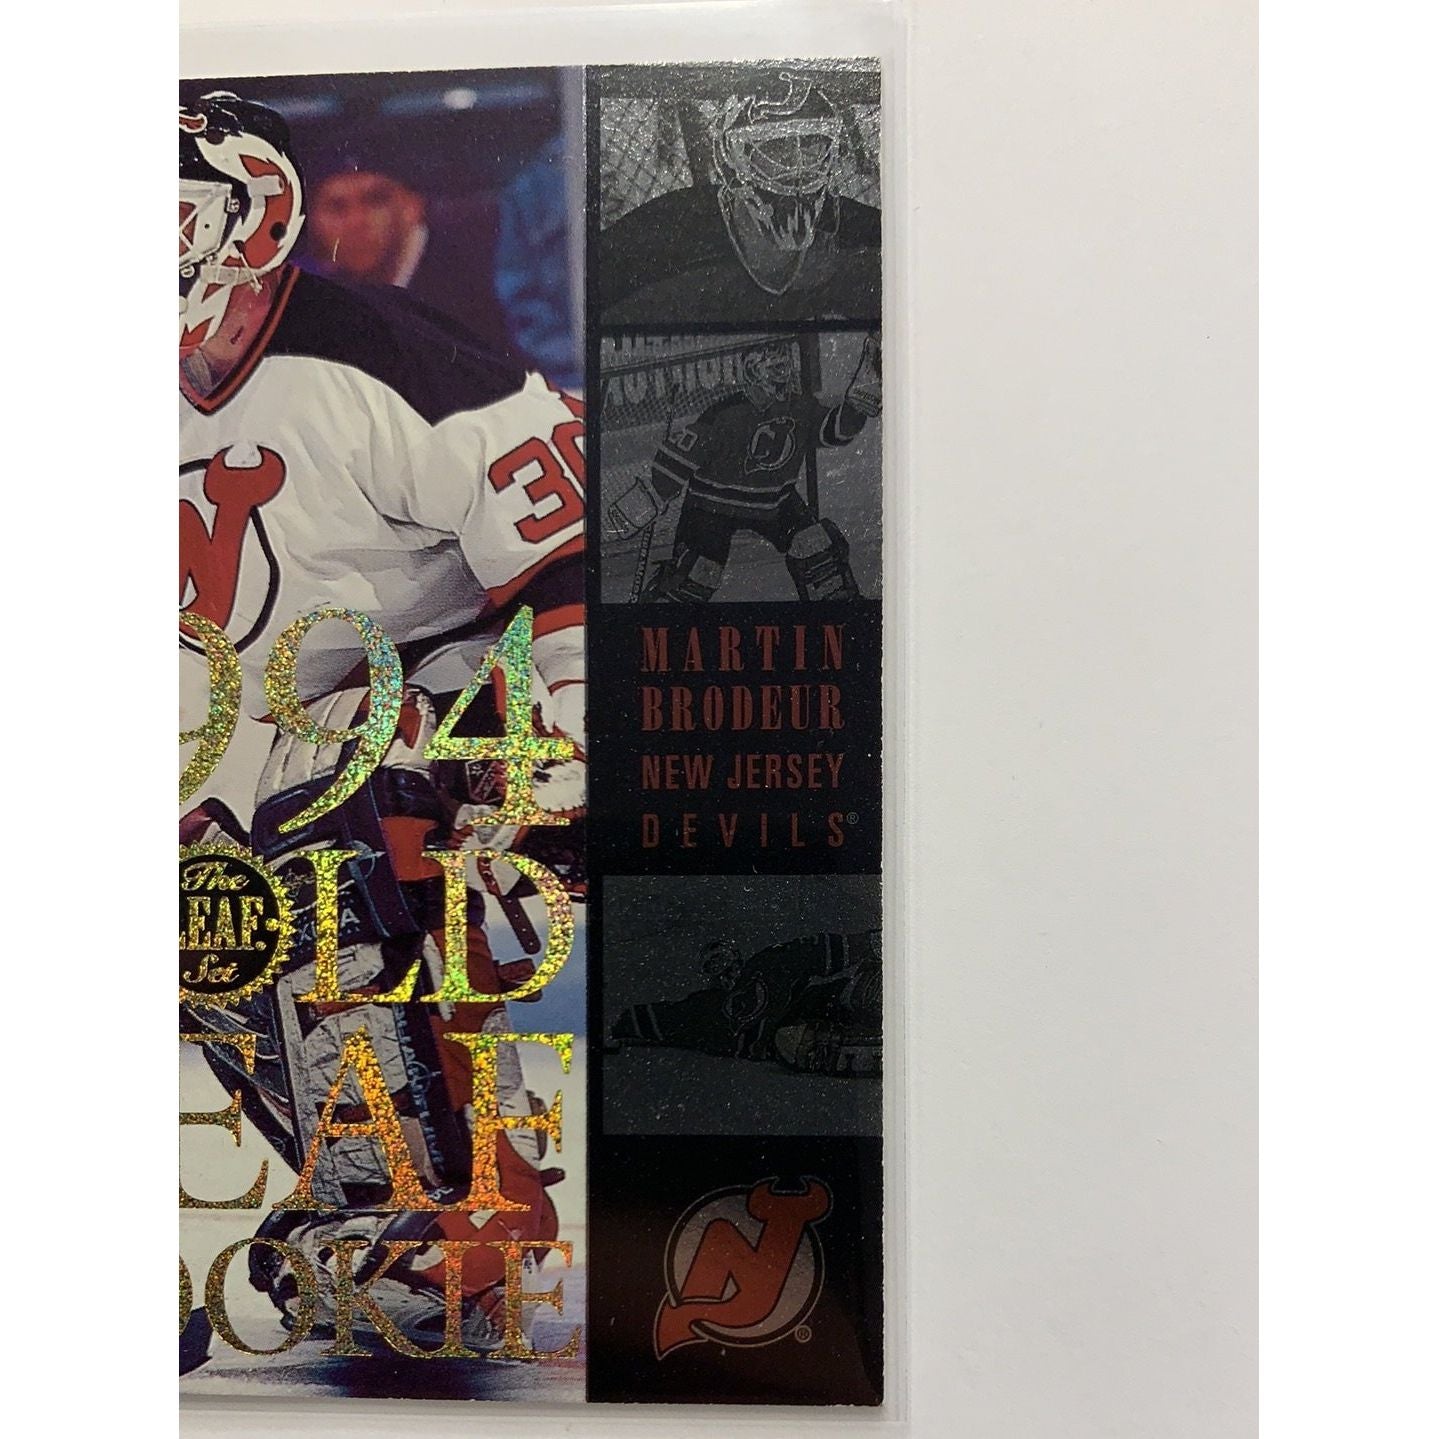  1994 Donruss The Leaf Set Martin Brodeur Rookie Card  Local Legends Cards & Collectibles